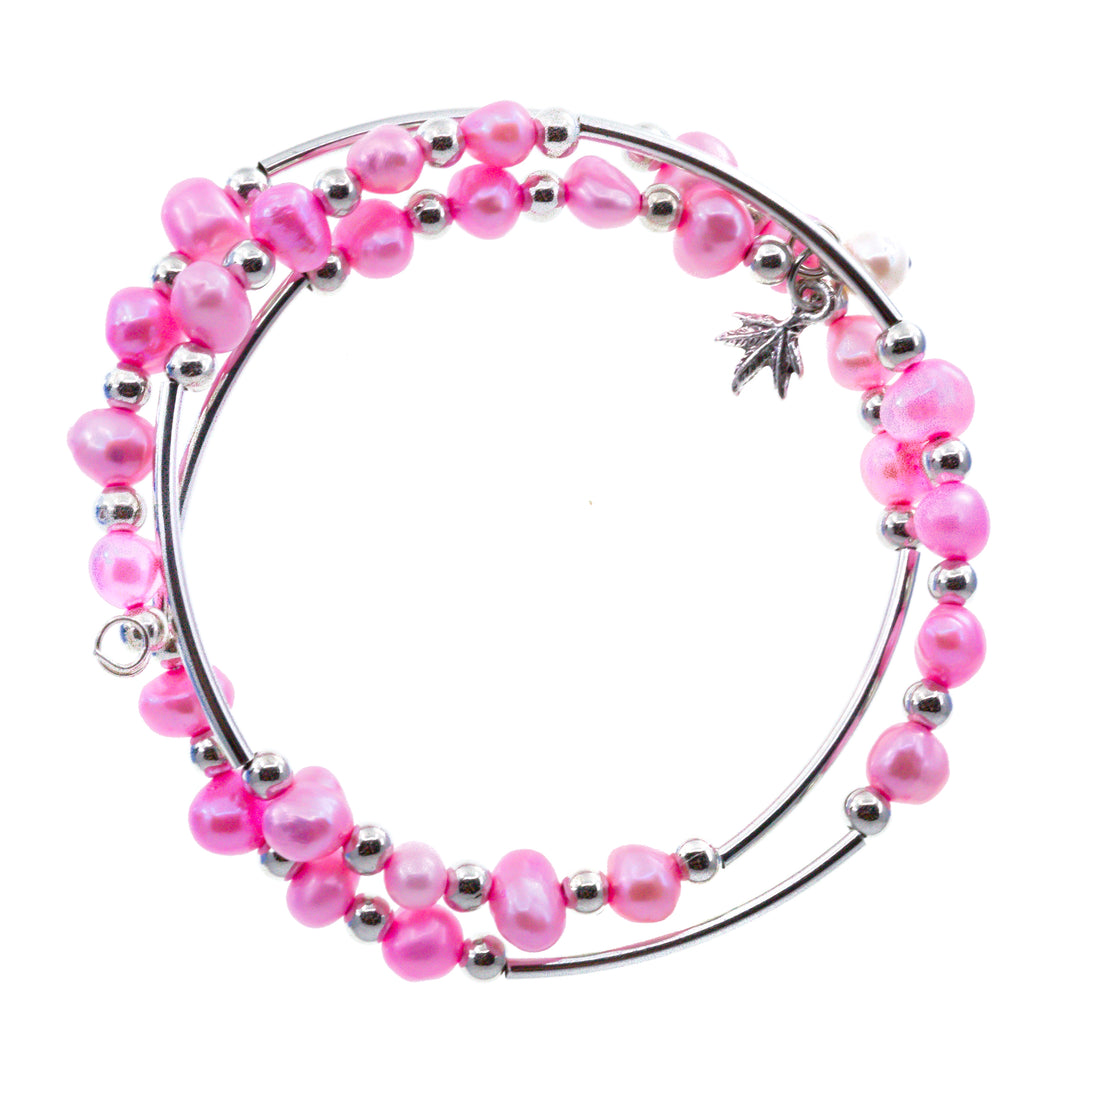 Pink Double Wire Wrap Stainless Steel Bracelets With Freshwater Pearls